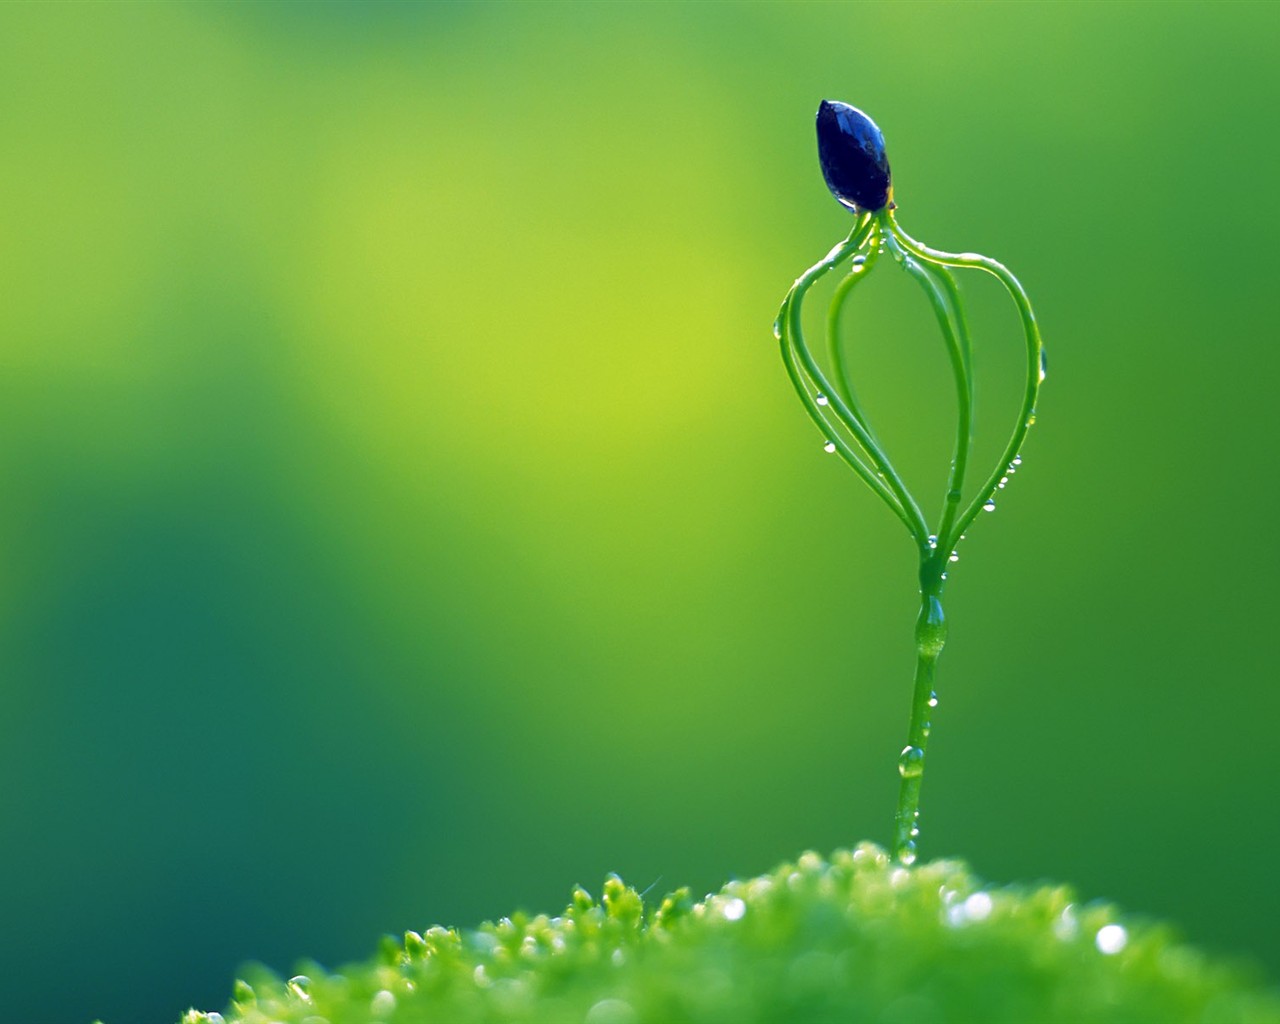 Sprout leaves HD Wallpaper (2) #39 - 1280x1024